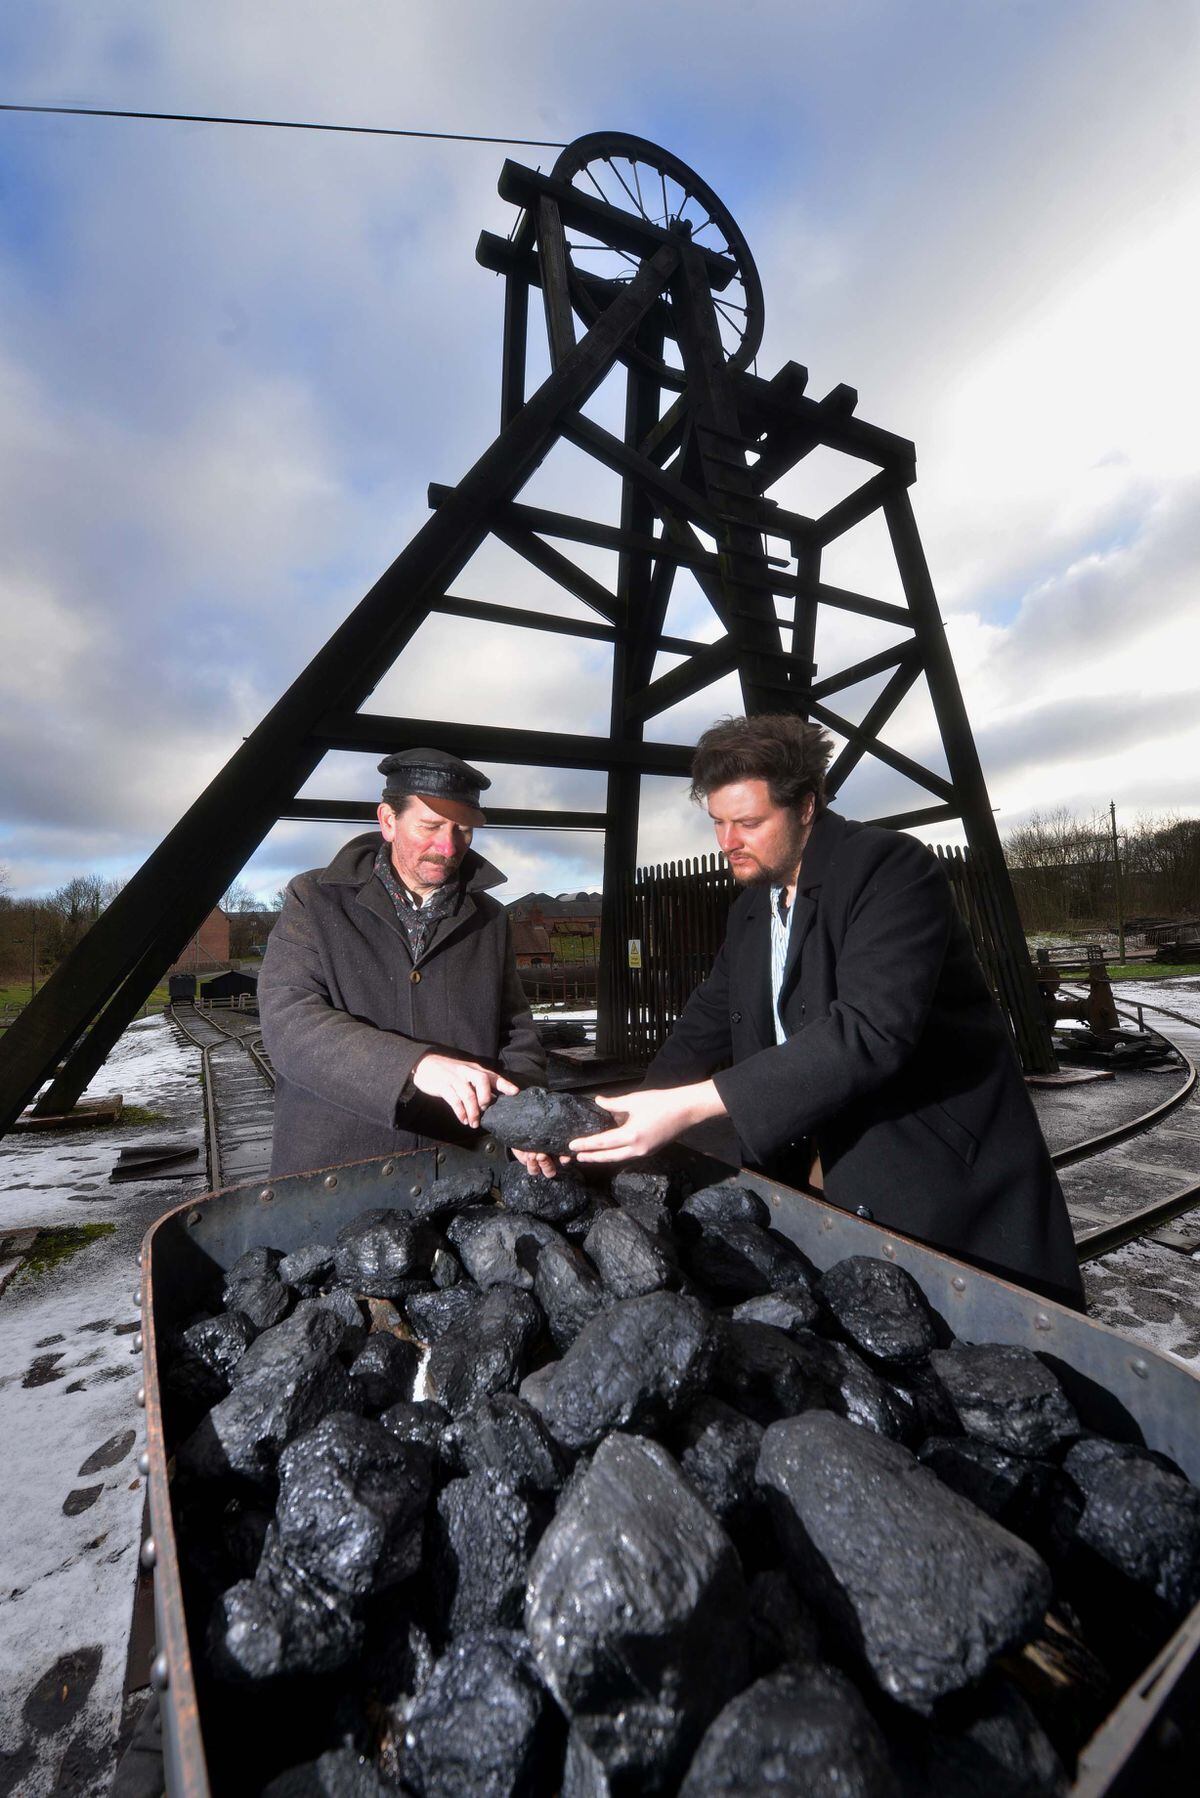 Slim and Darren look over some of the coal